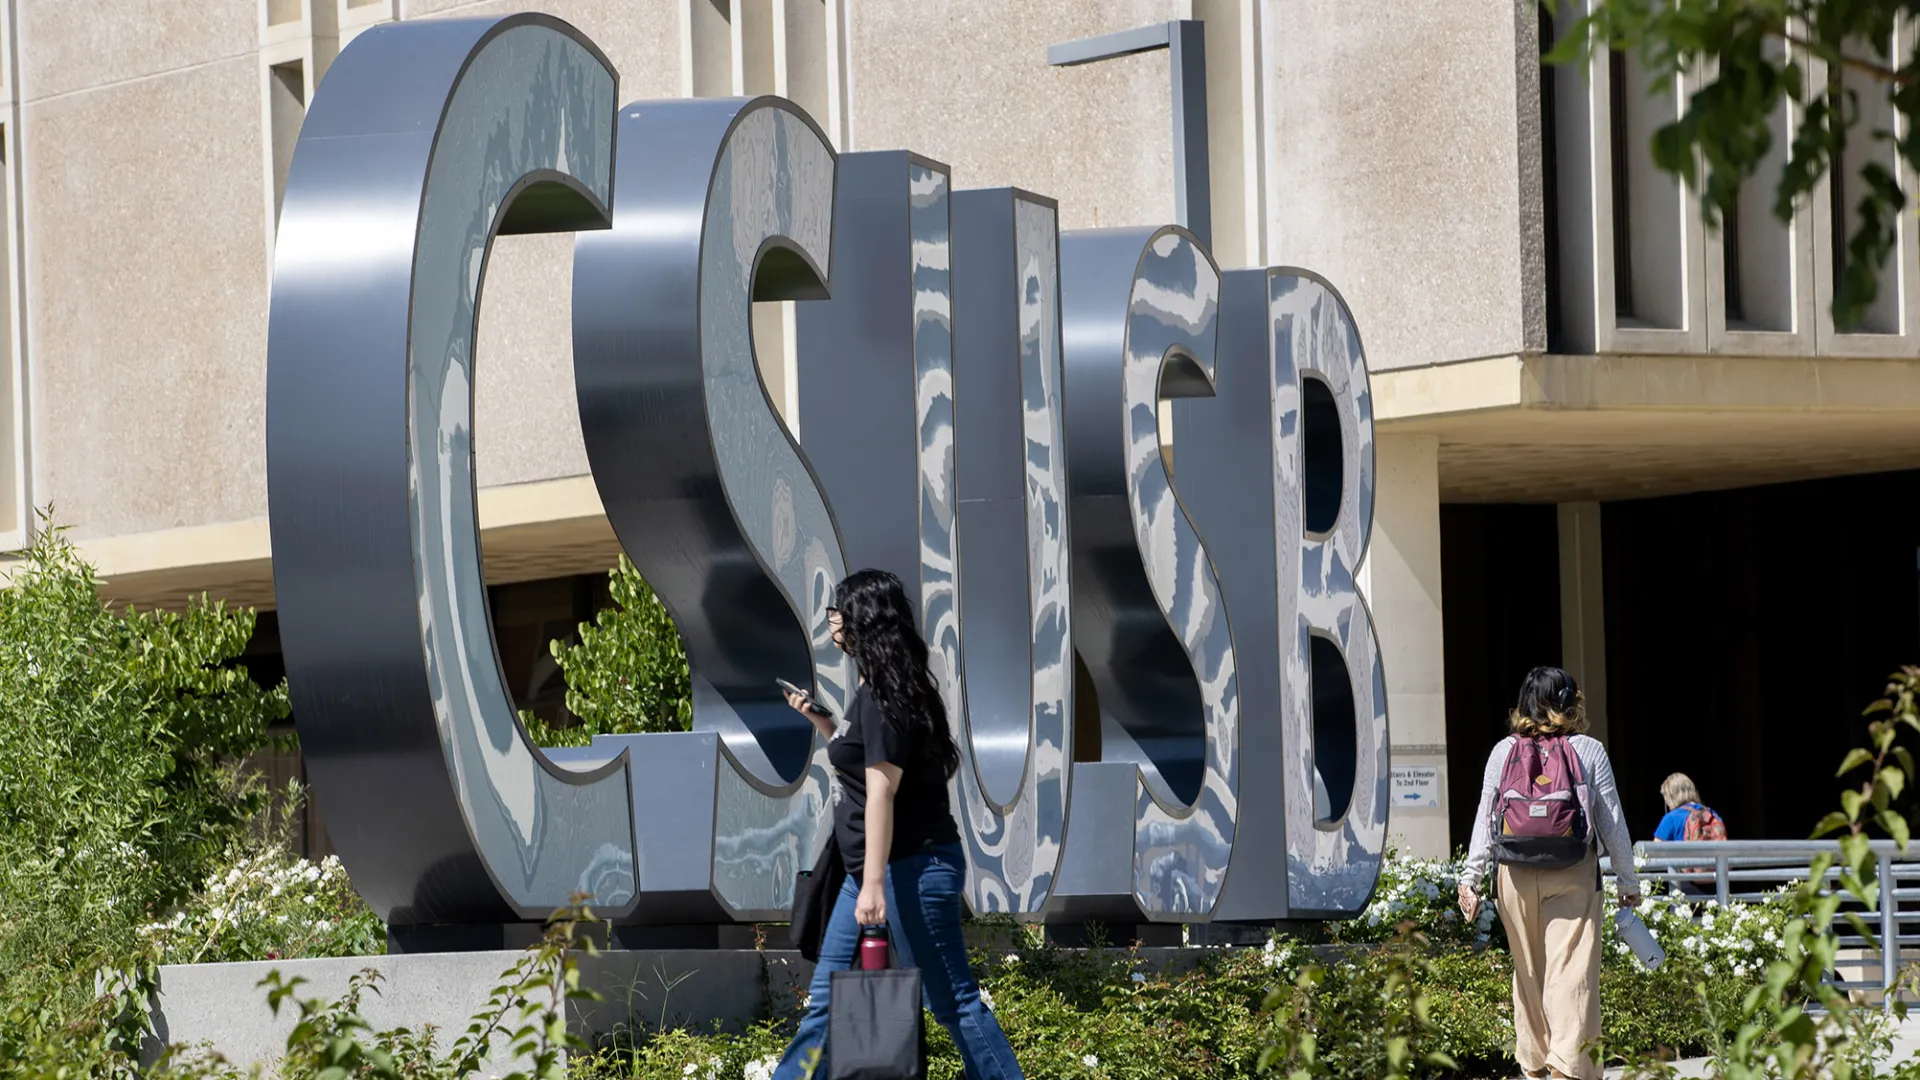 Students by the CSUSB spirit letters